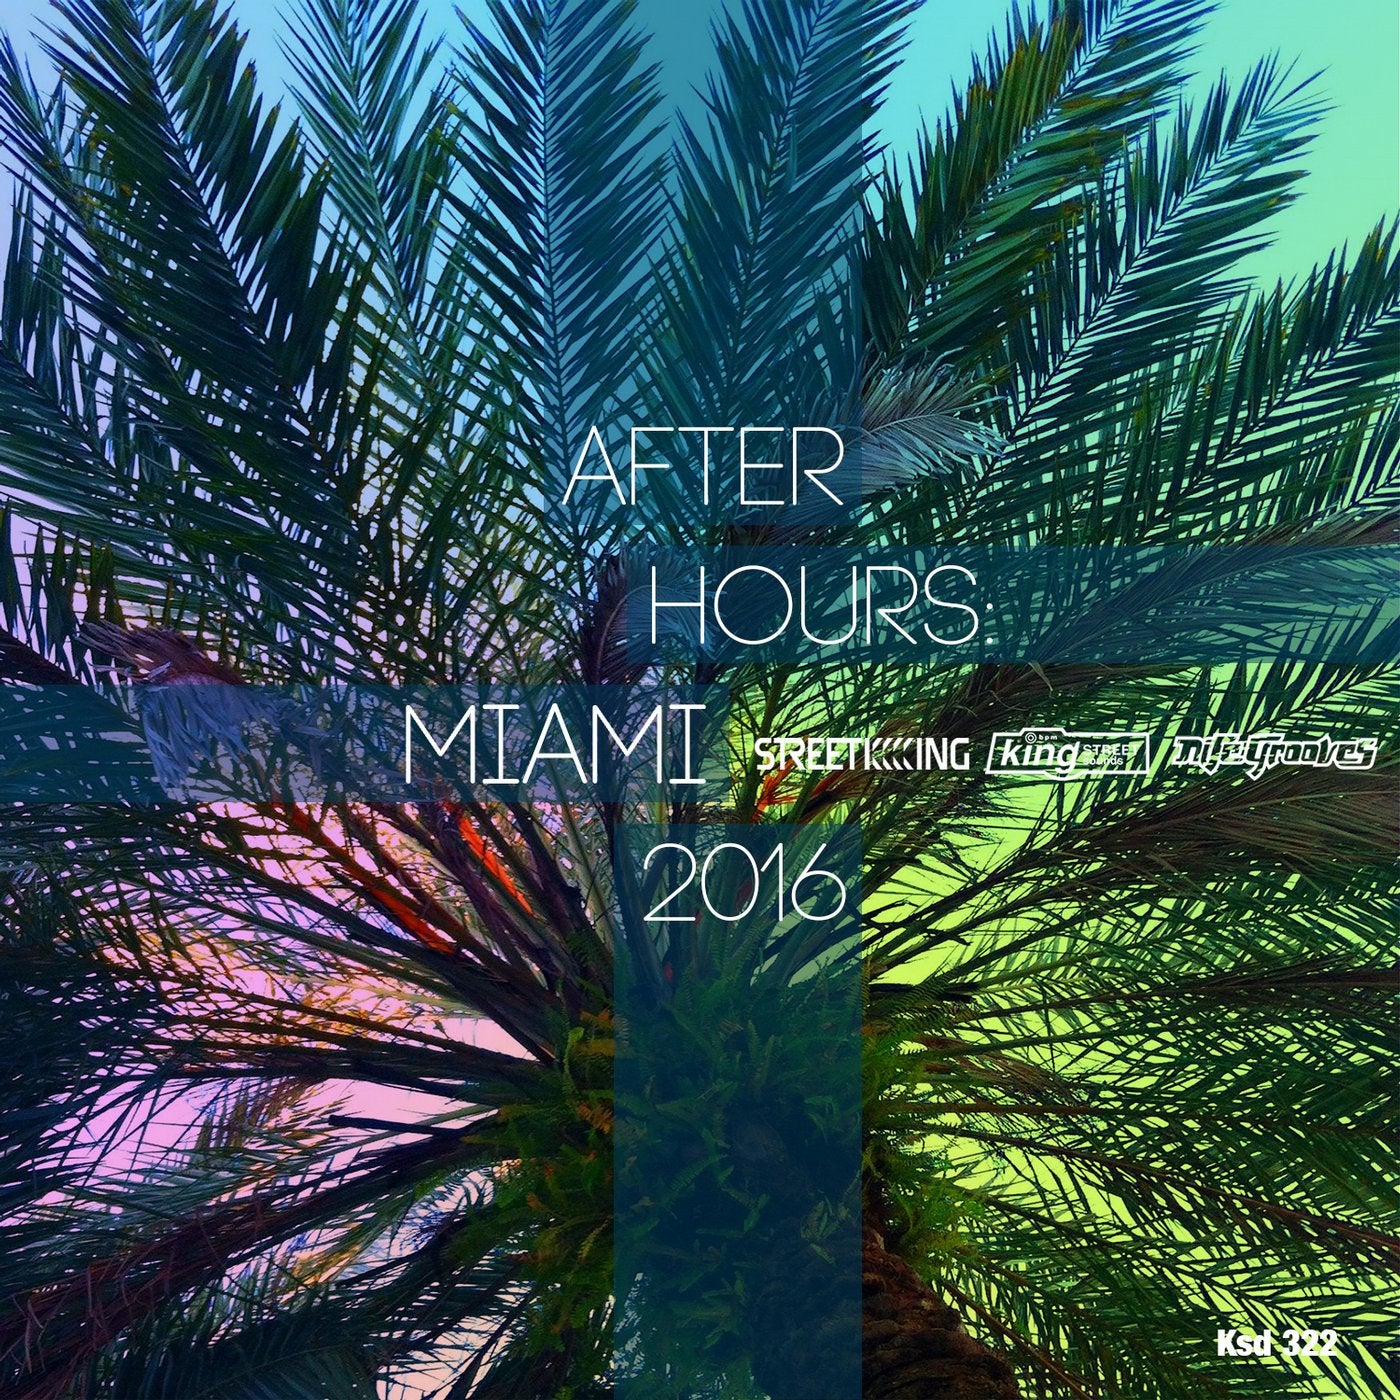 After Hours: Miami 2016